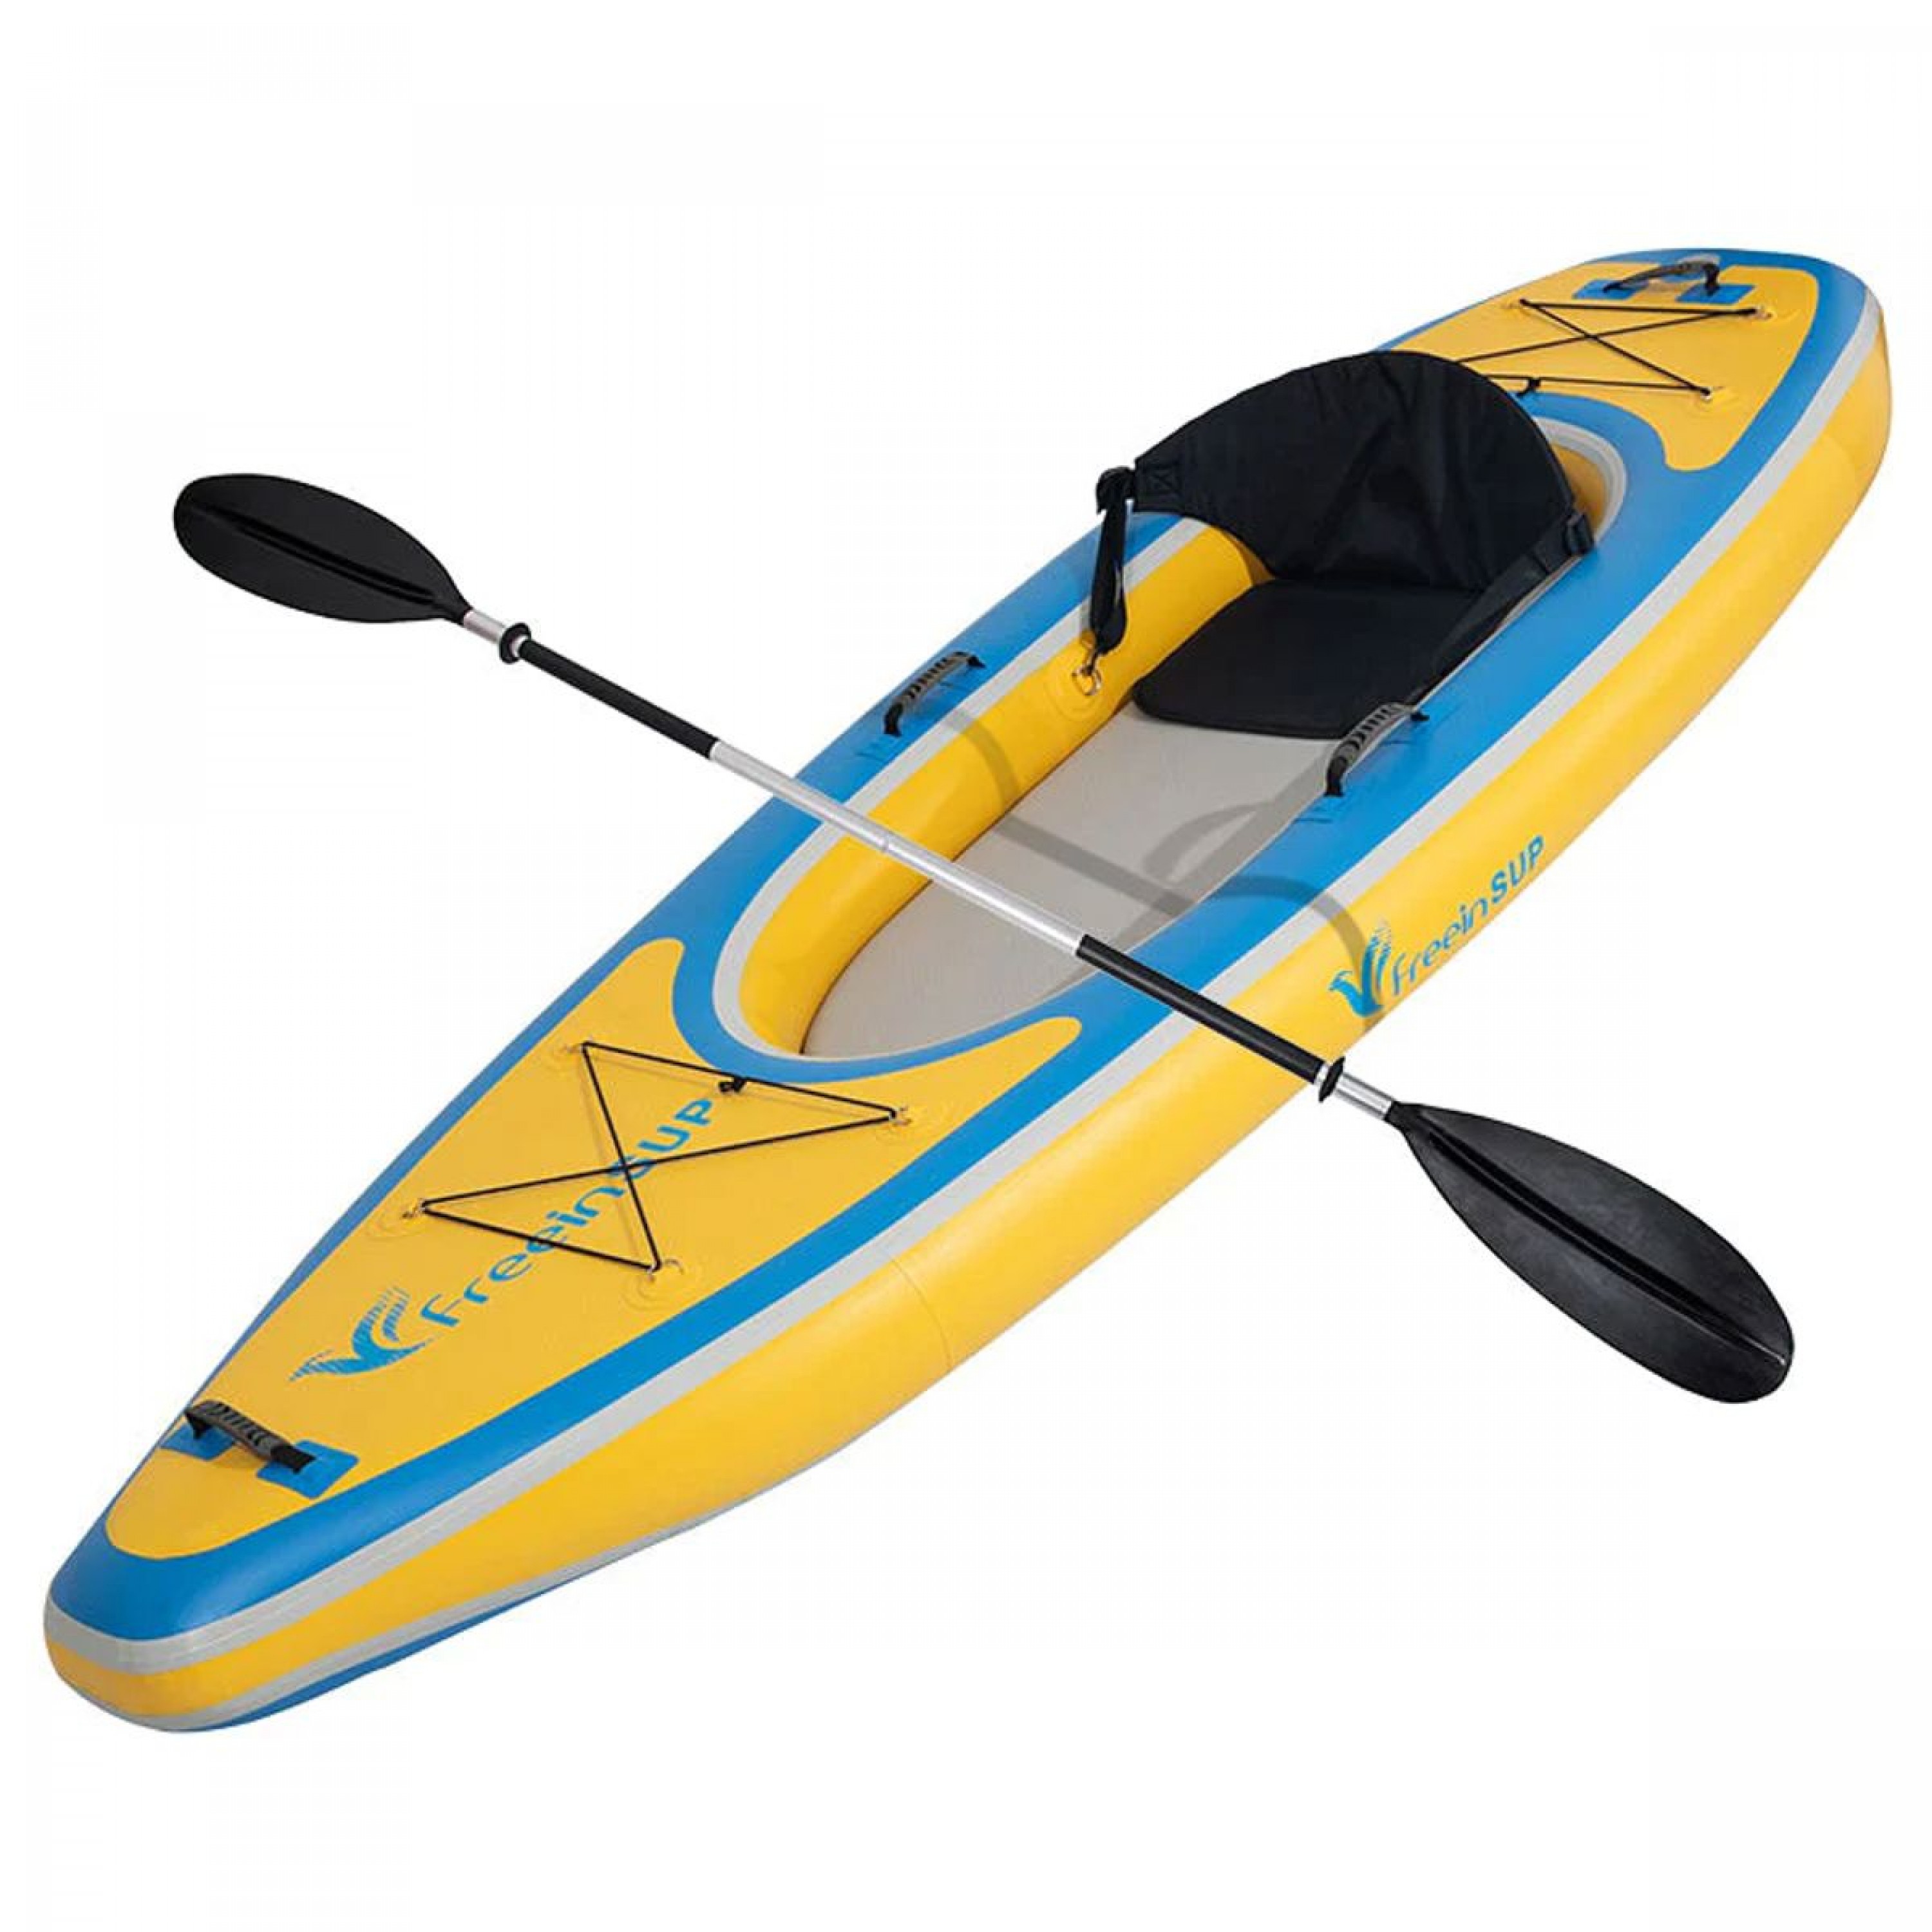 FREEIN 10FT KAYAK INFLATABLE WITH ALUMINUM PADDLES, PUMP AND CARRY BAG